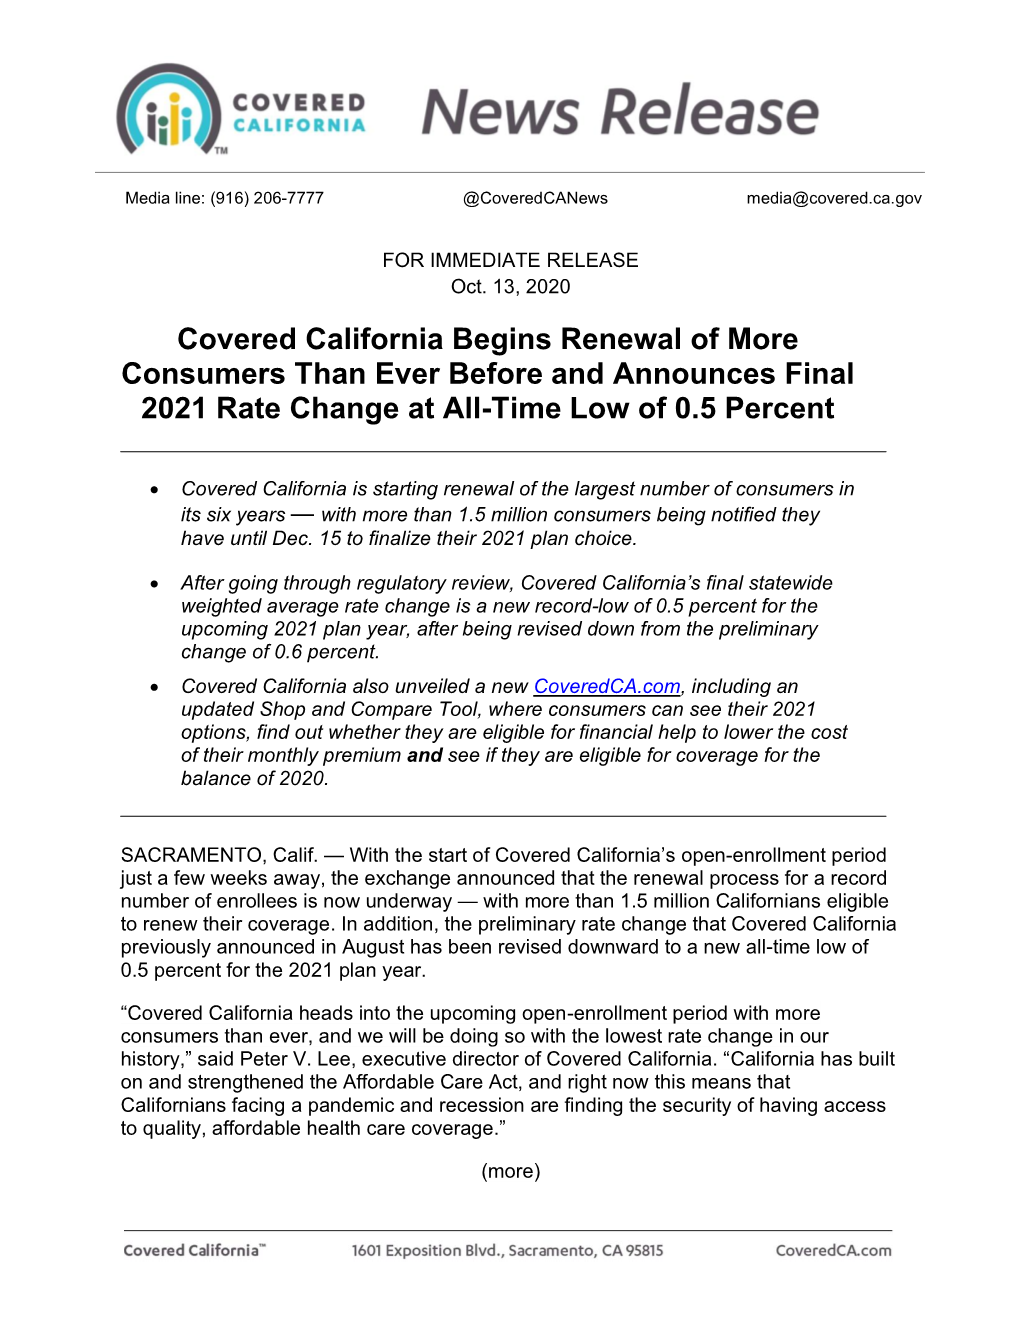 Covered California Begins Renewal of More Consumers Than Ever Before and Announces Final 2021 Rate Change at All-Time Low of 0.5 Percent